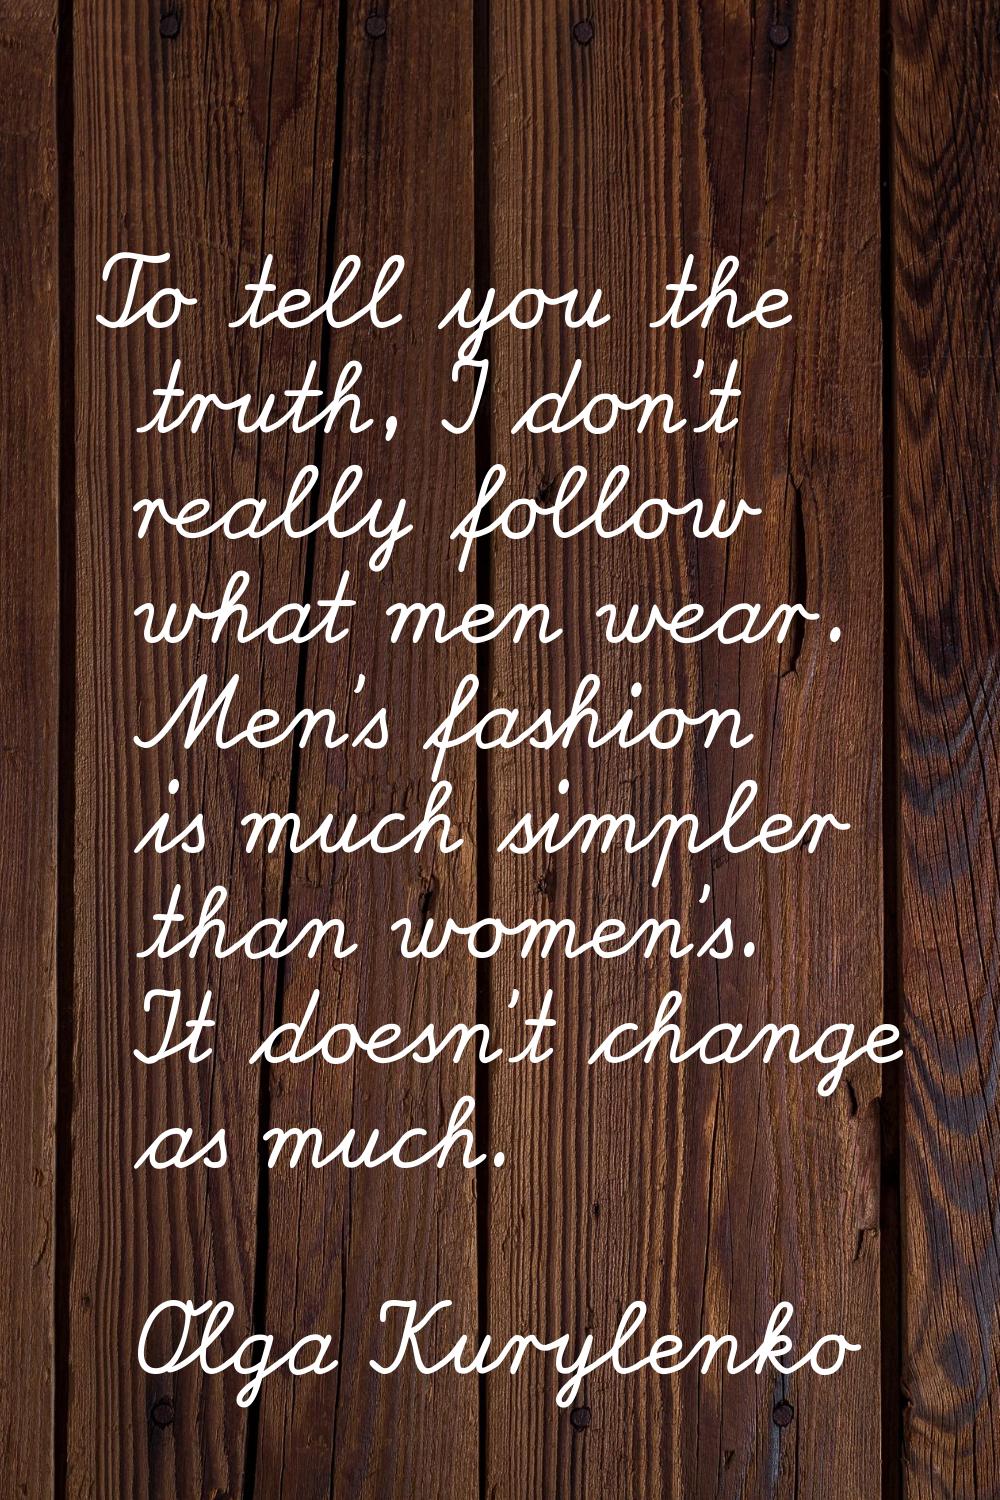 To tell you the truth, I don't really follow what men wear. Men's fashion is much simpler than wome